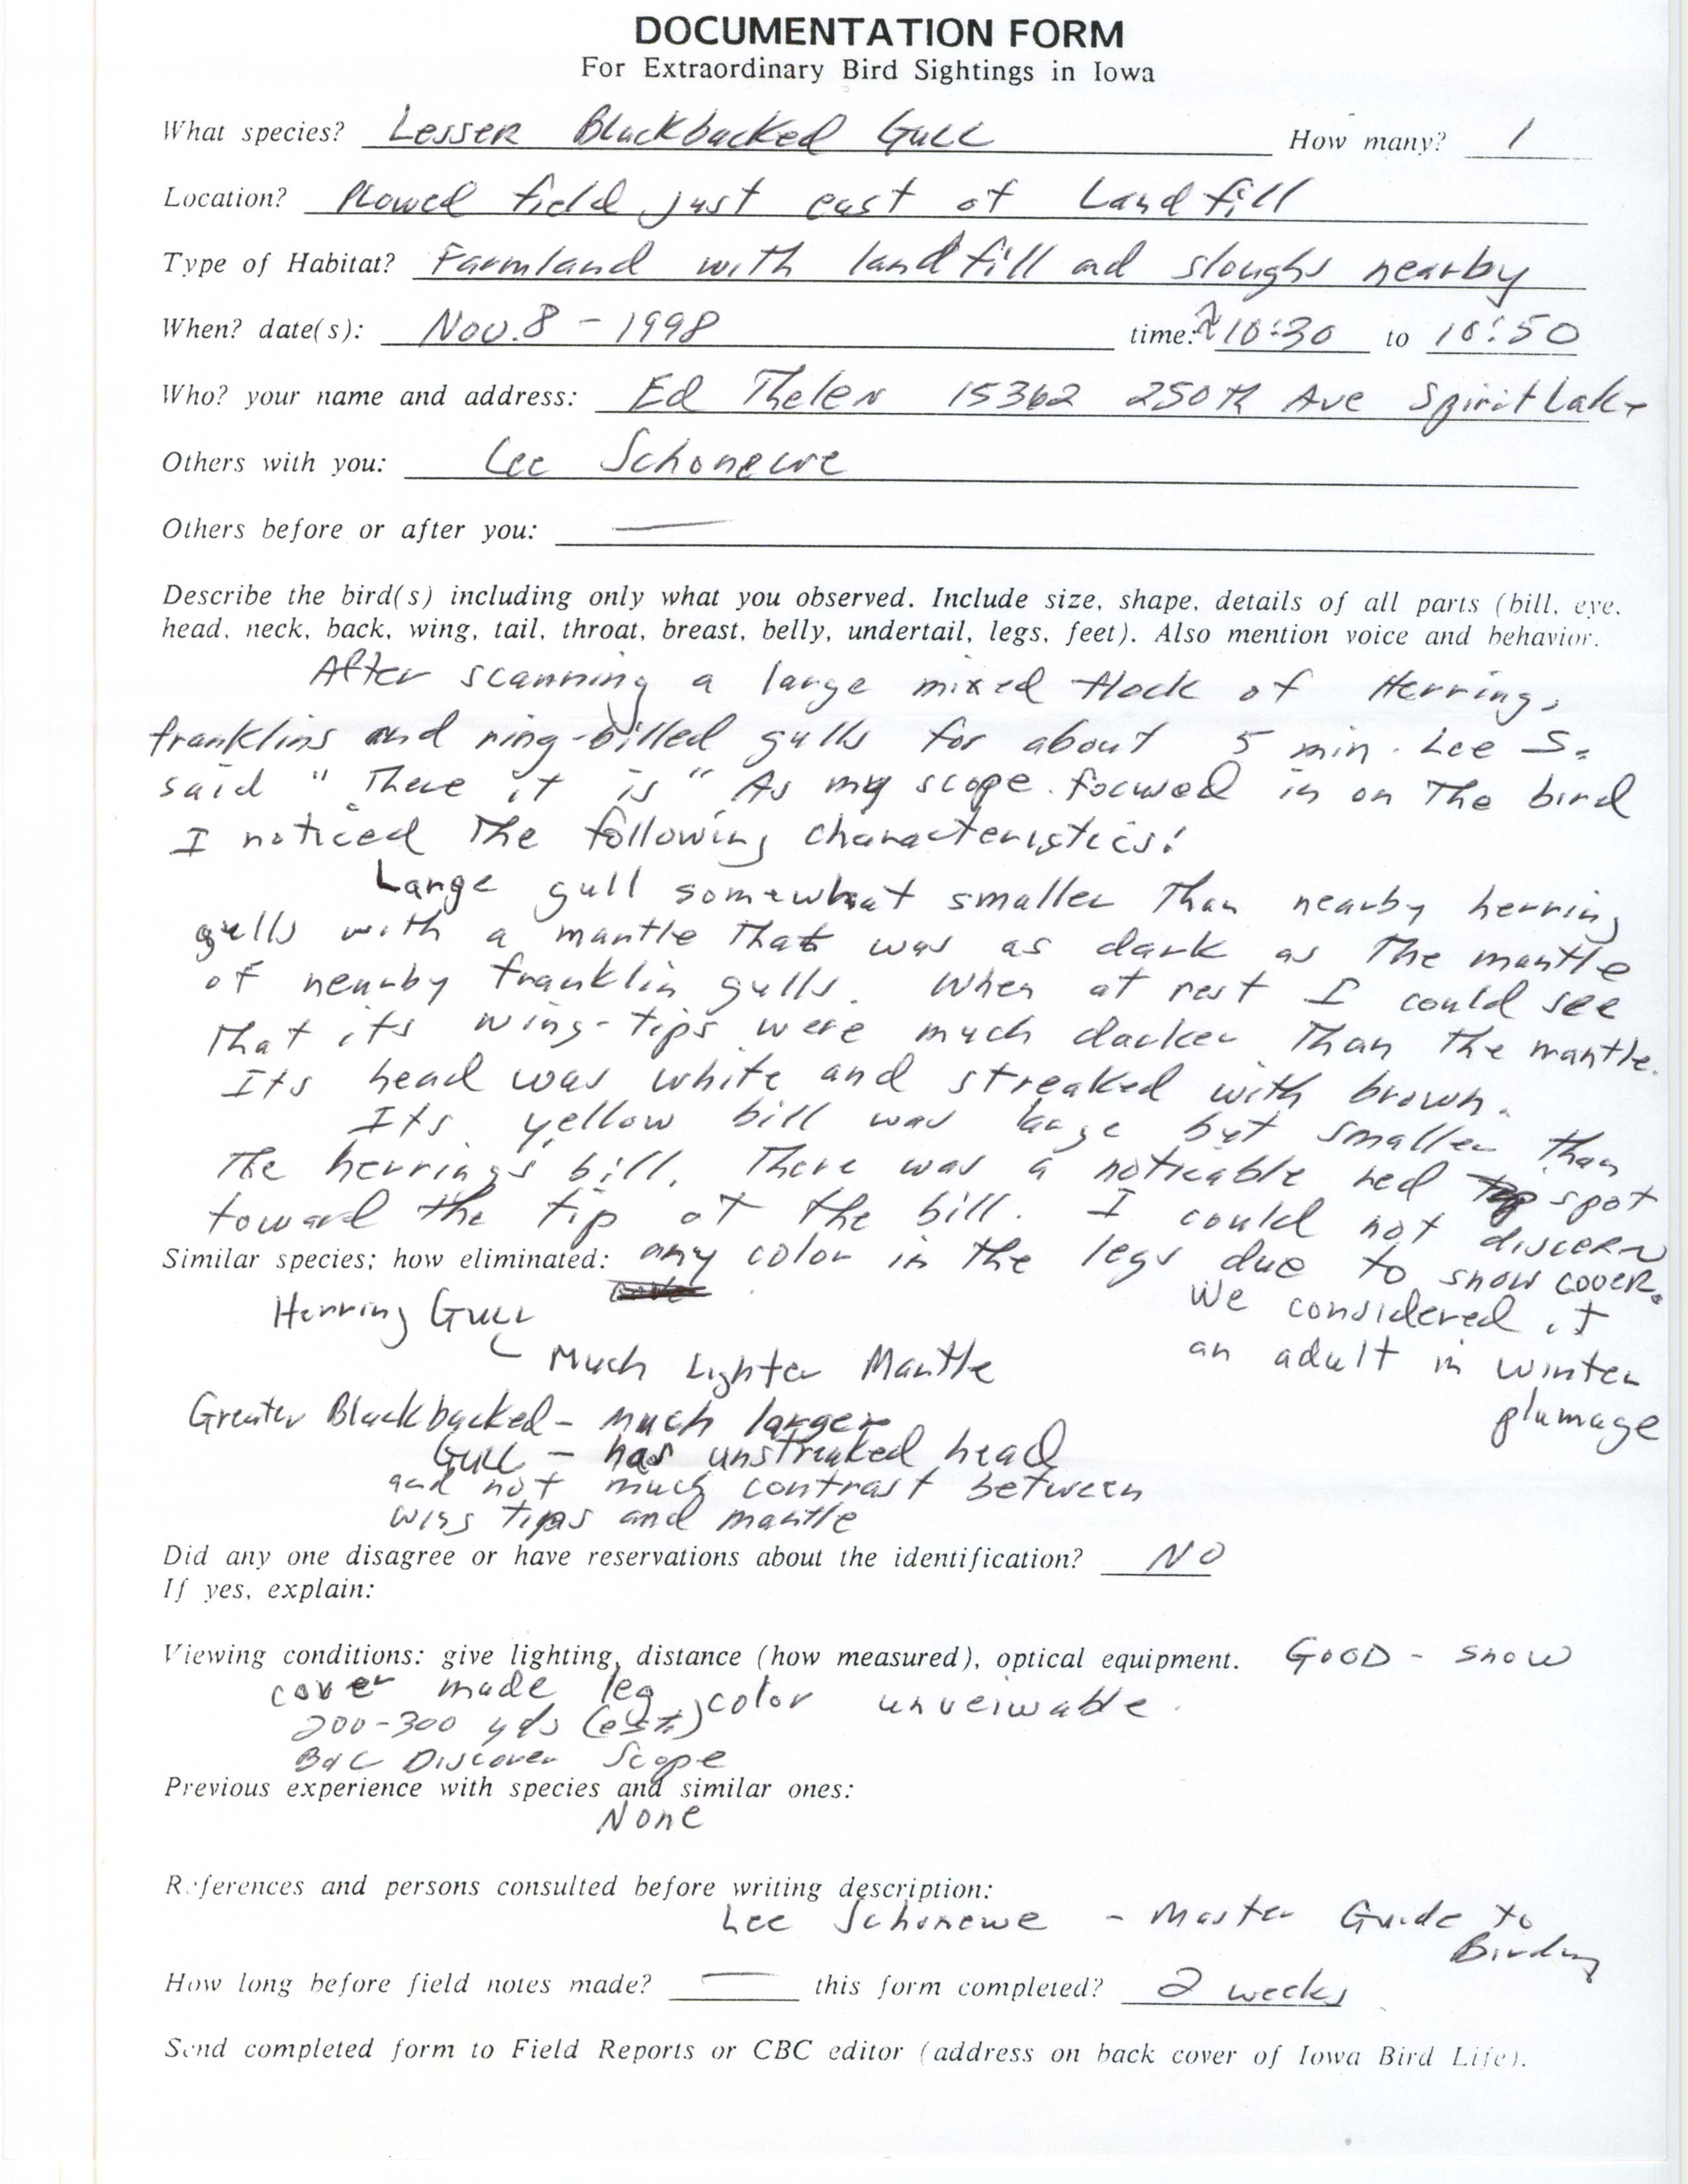 Rare bird documentation form for Lesser Black-backed Gull at Iowa in 1998